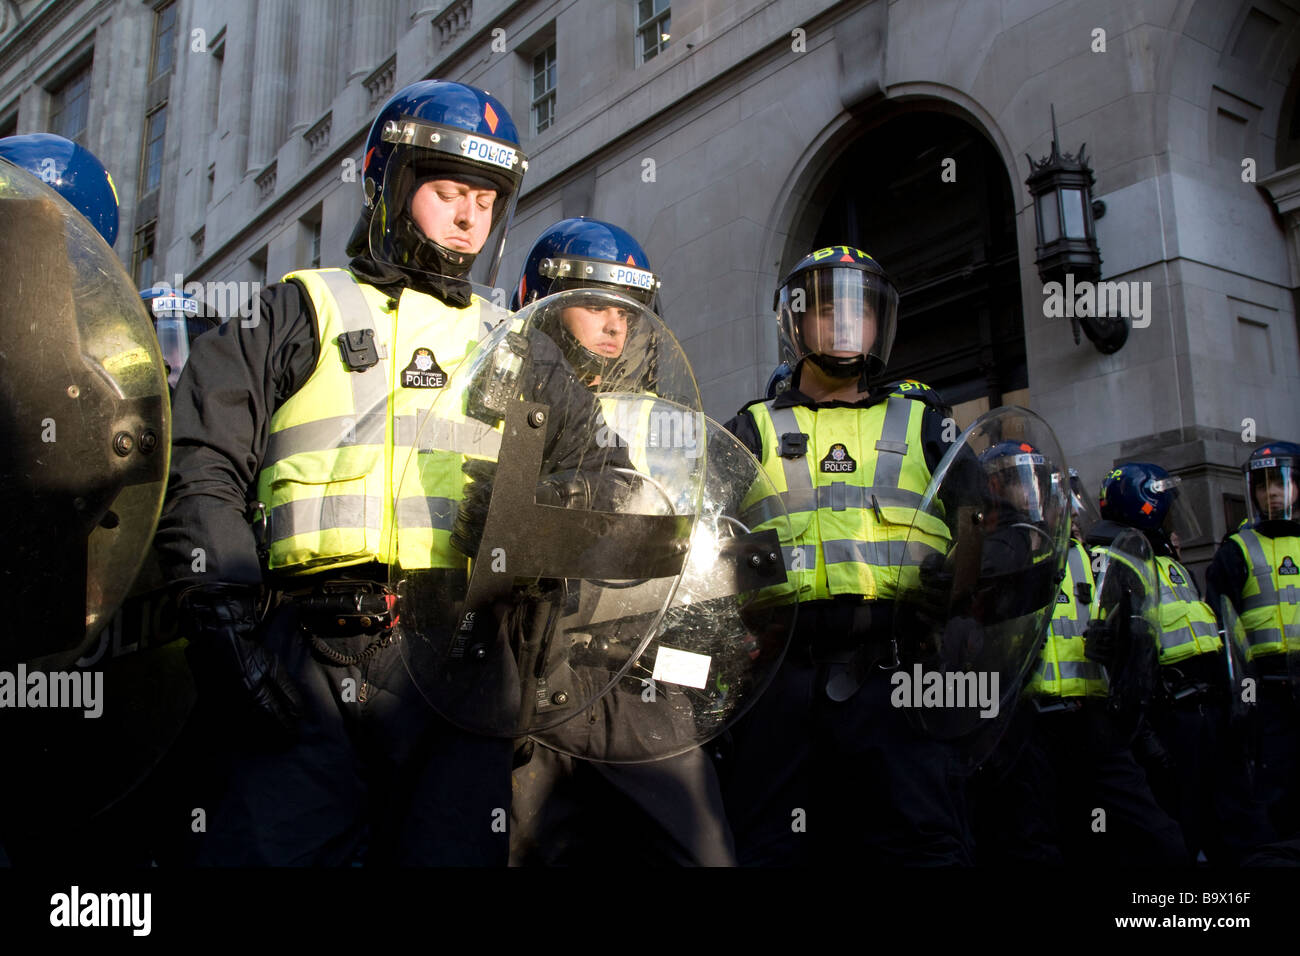 Riot Police at G20 summit protests Cornhill Street City of London UK Stock Photo